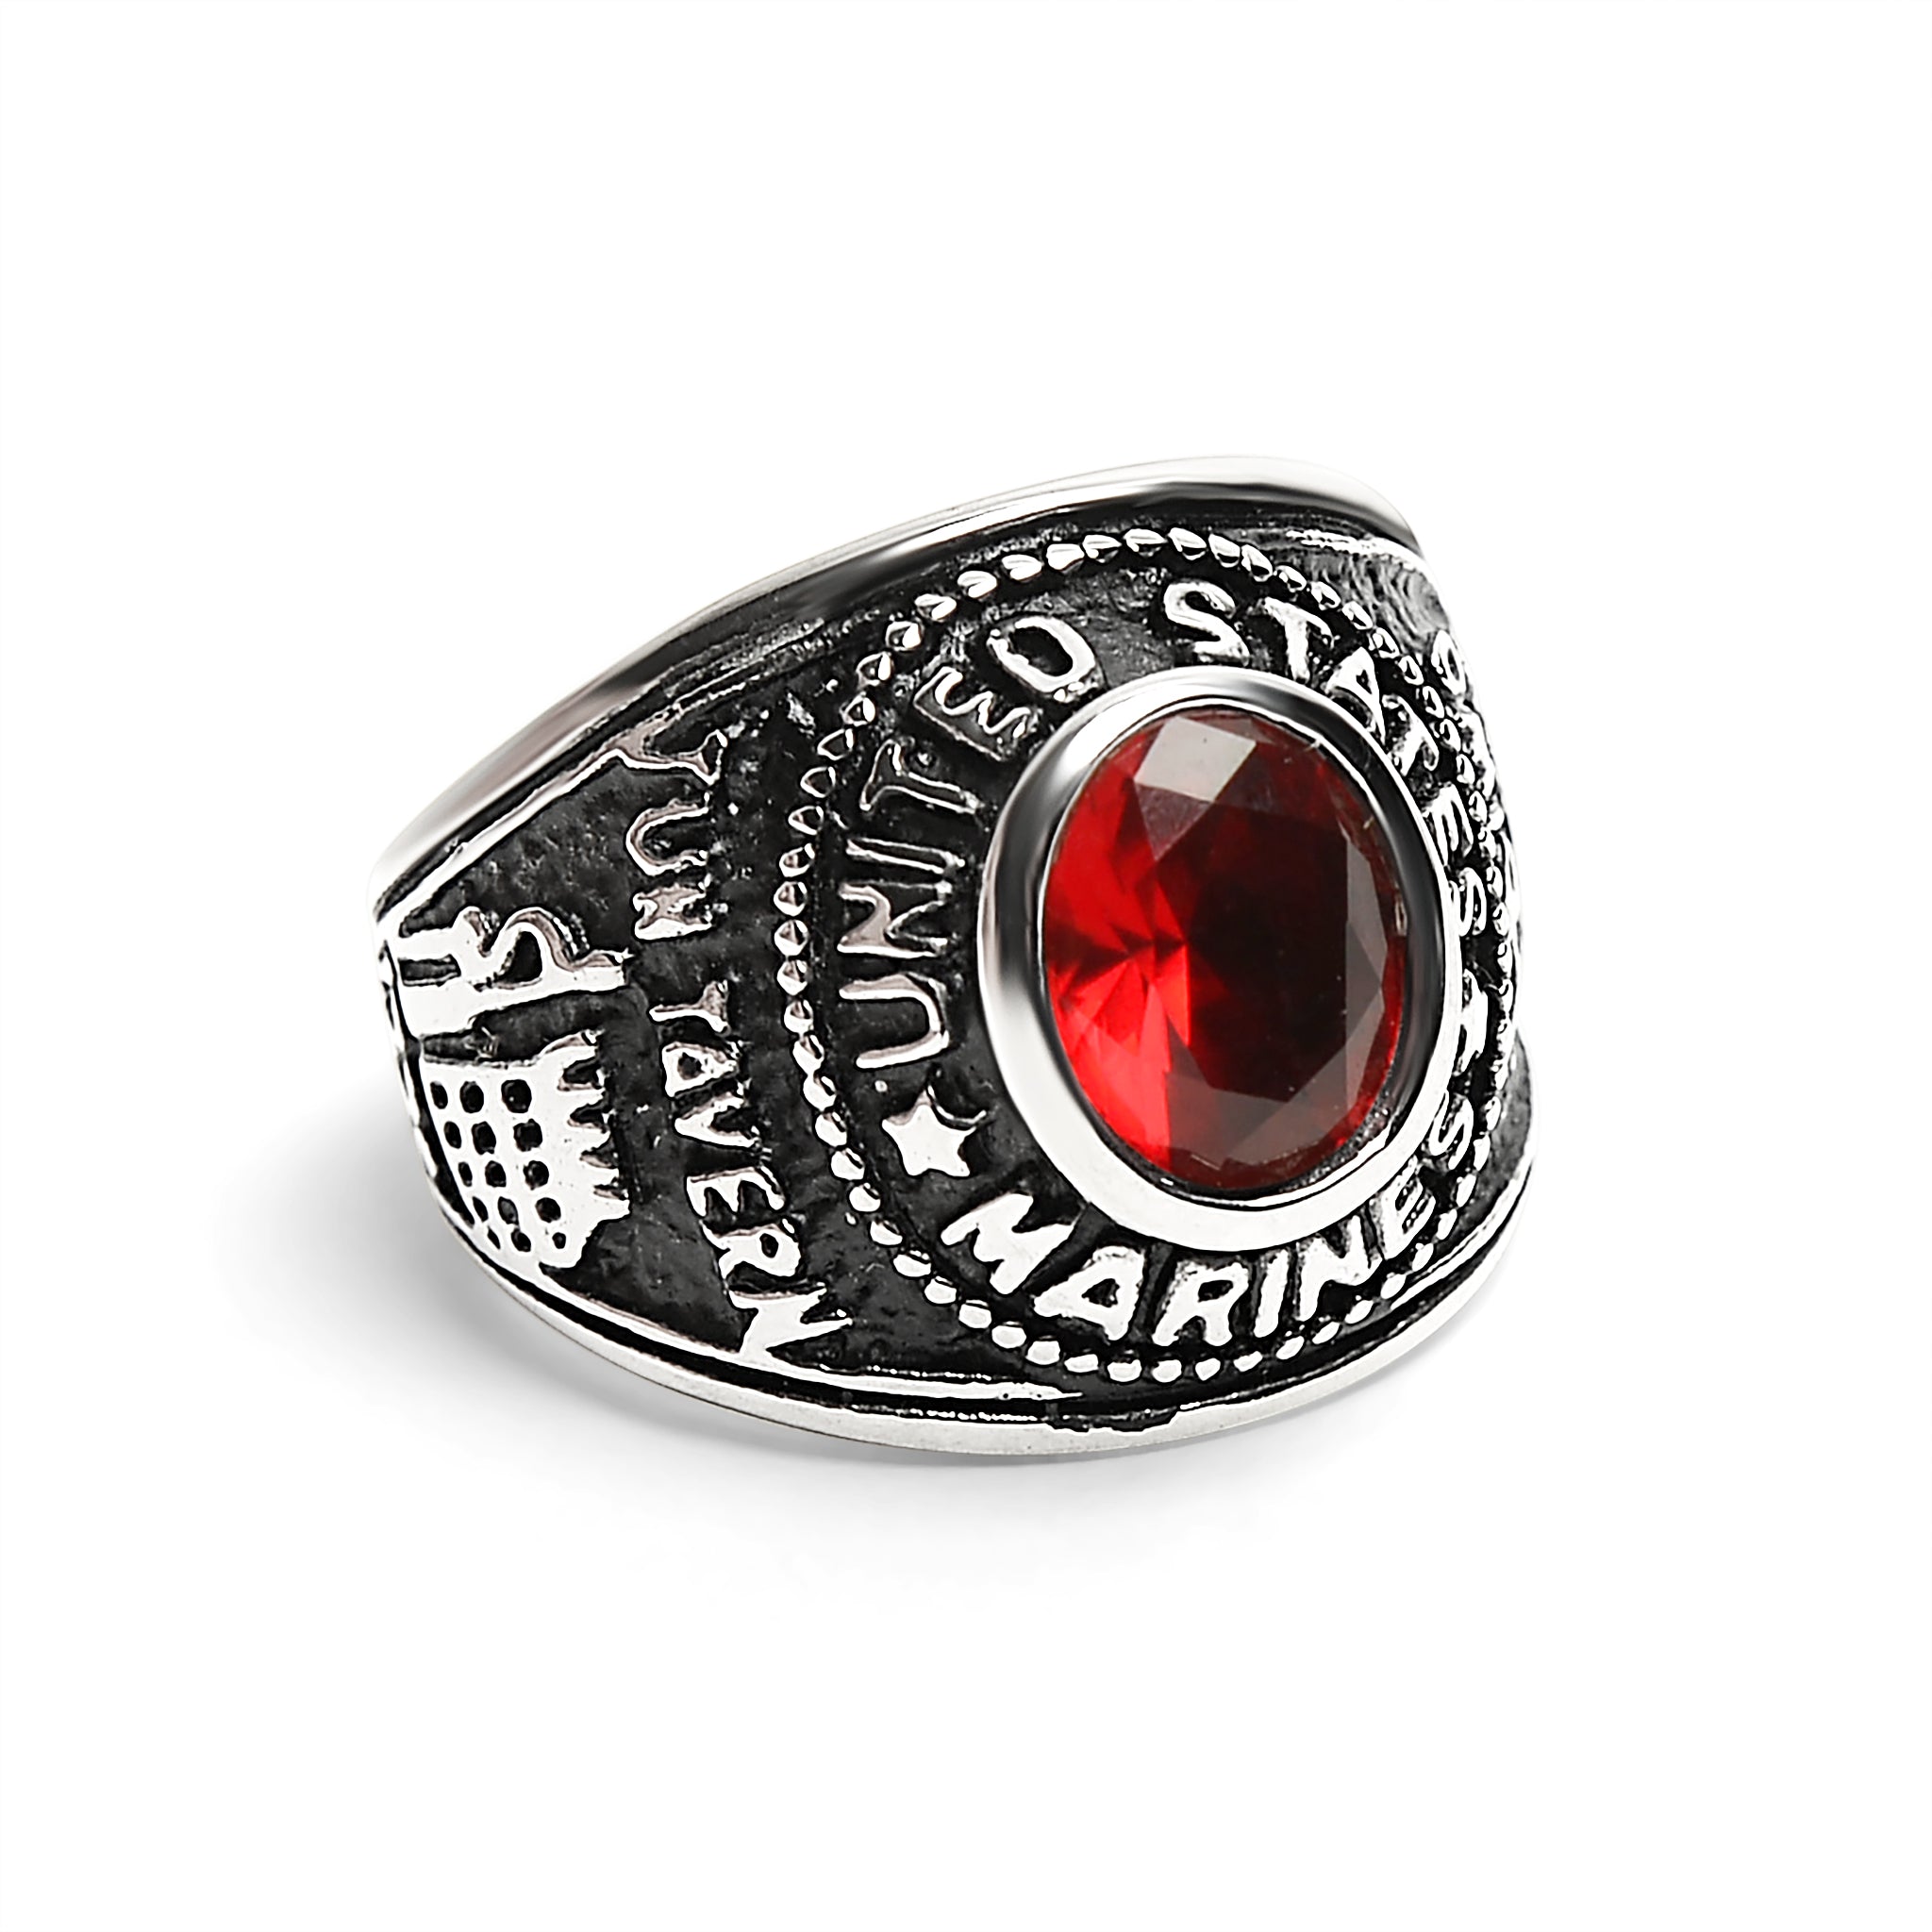 United States Marine Corp Military Stainless Steel Women's Ring with Red Stone / MCR4070